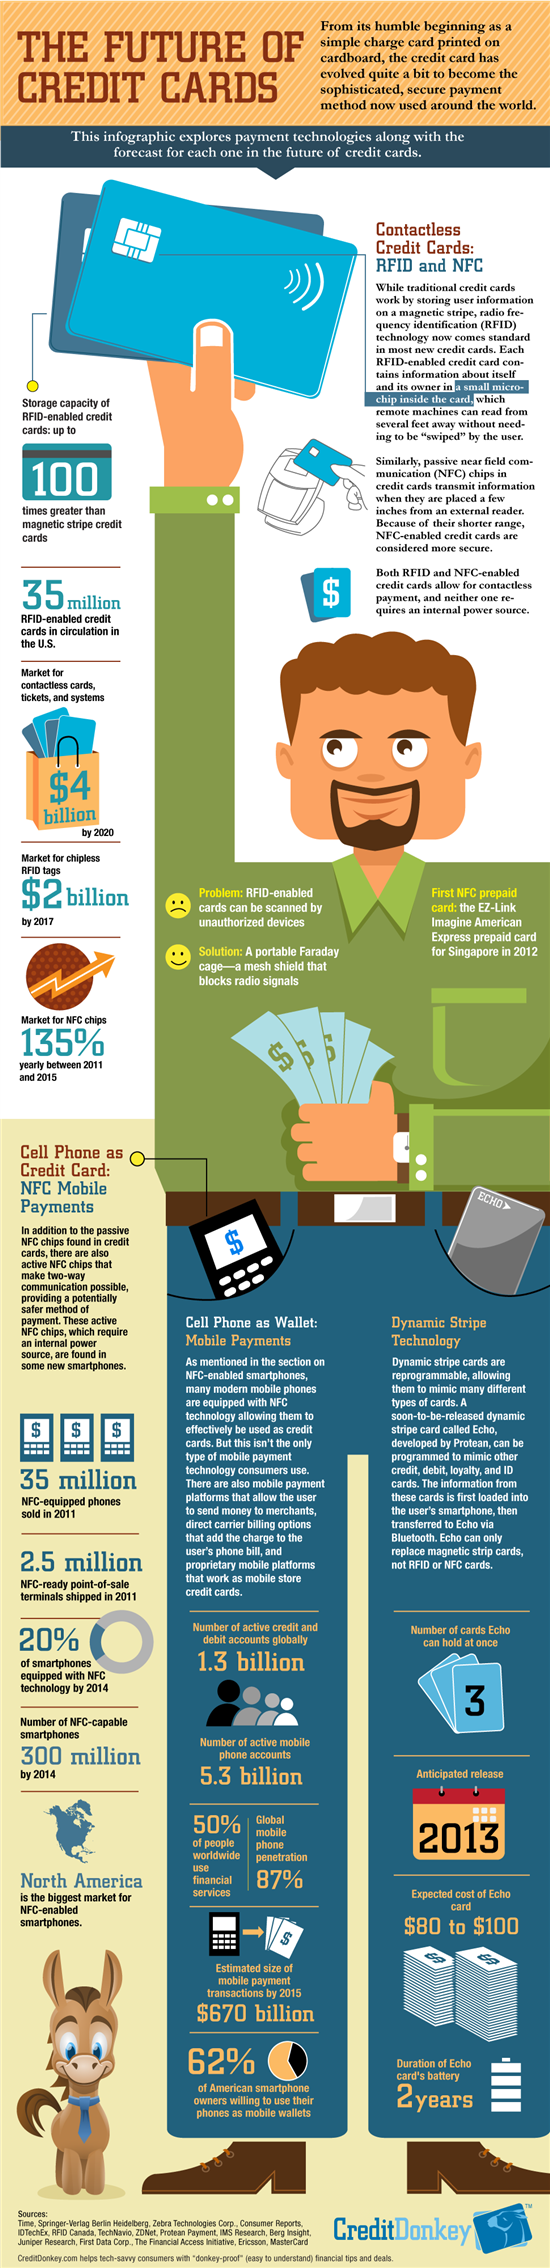 Infographic: Future of Credit Cards